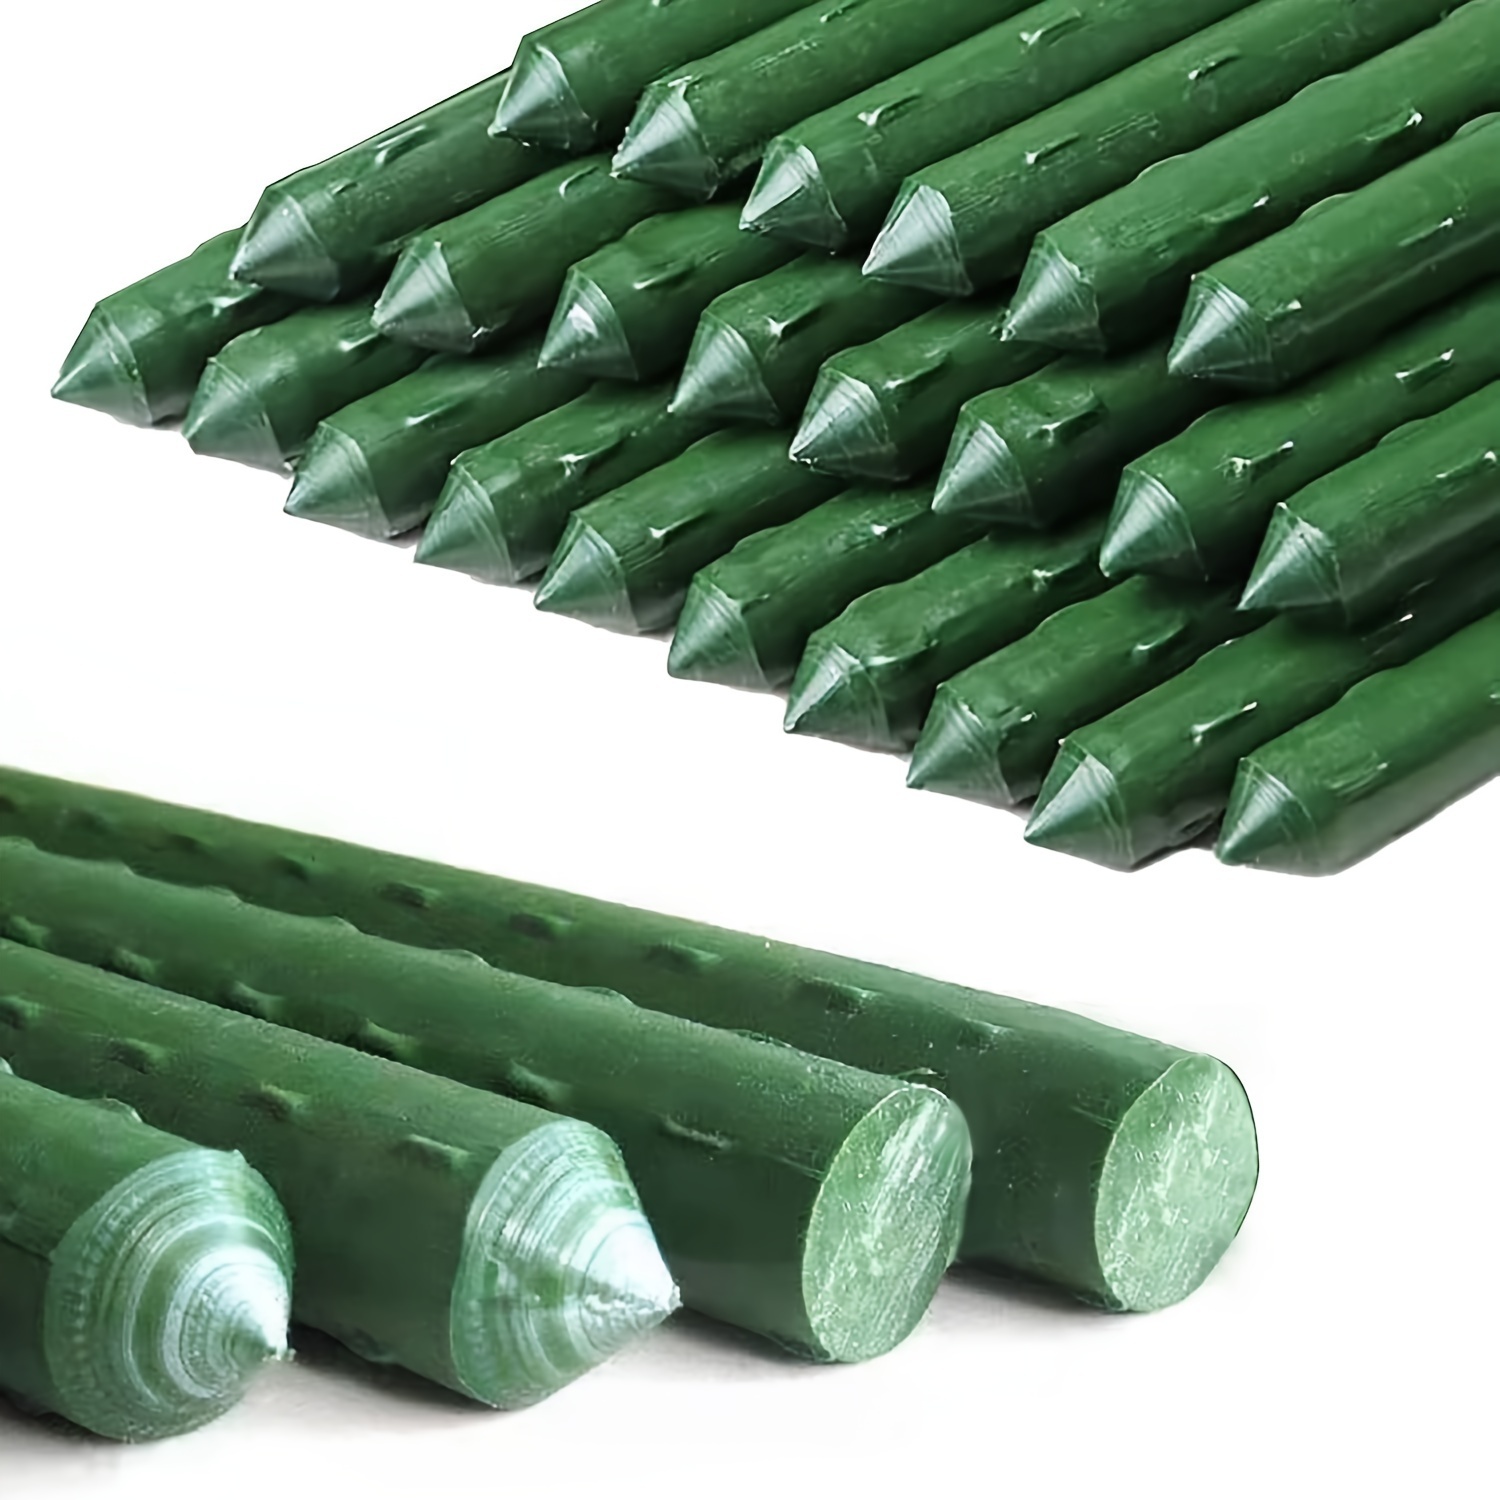 

10pcs, Garden Stakes Coated Steel Plant Pole For Fixing Trees And Plants. (length: 1.97 Ft), Garden Tool Supplies, Plant Holder